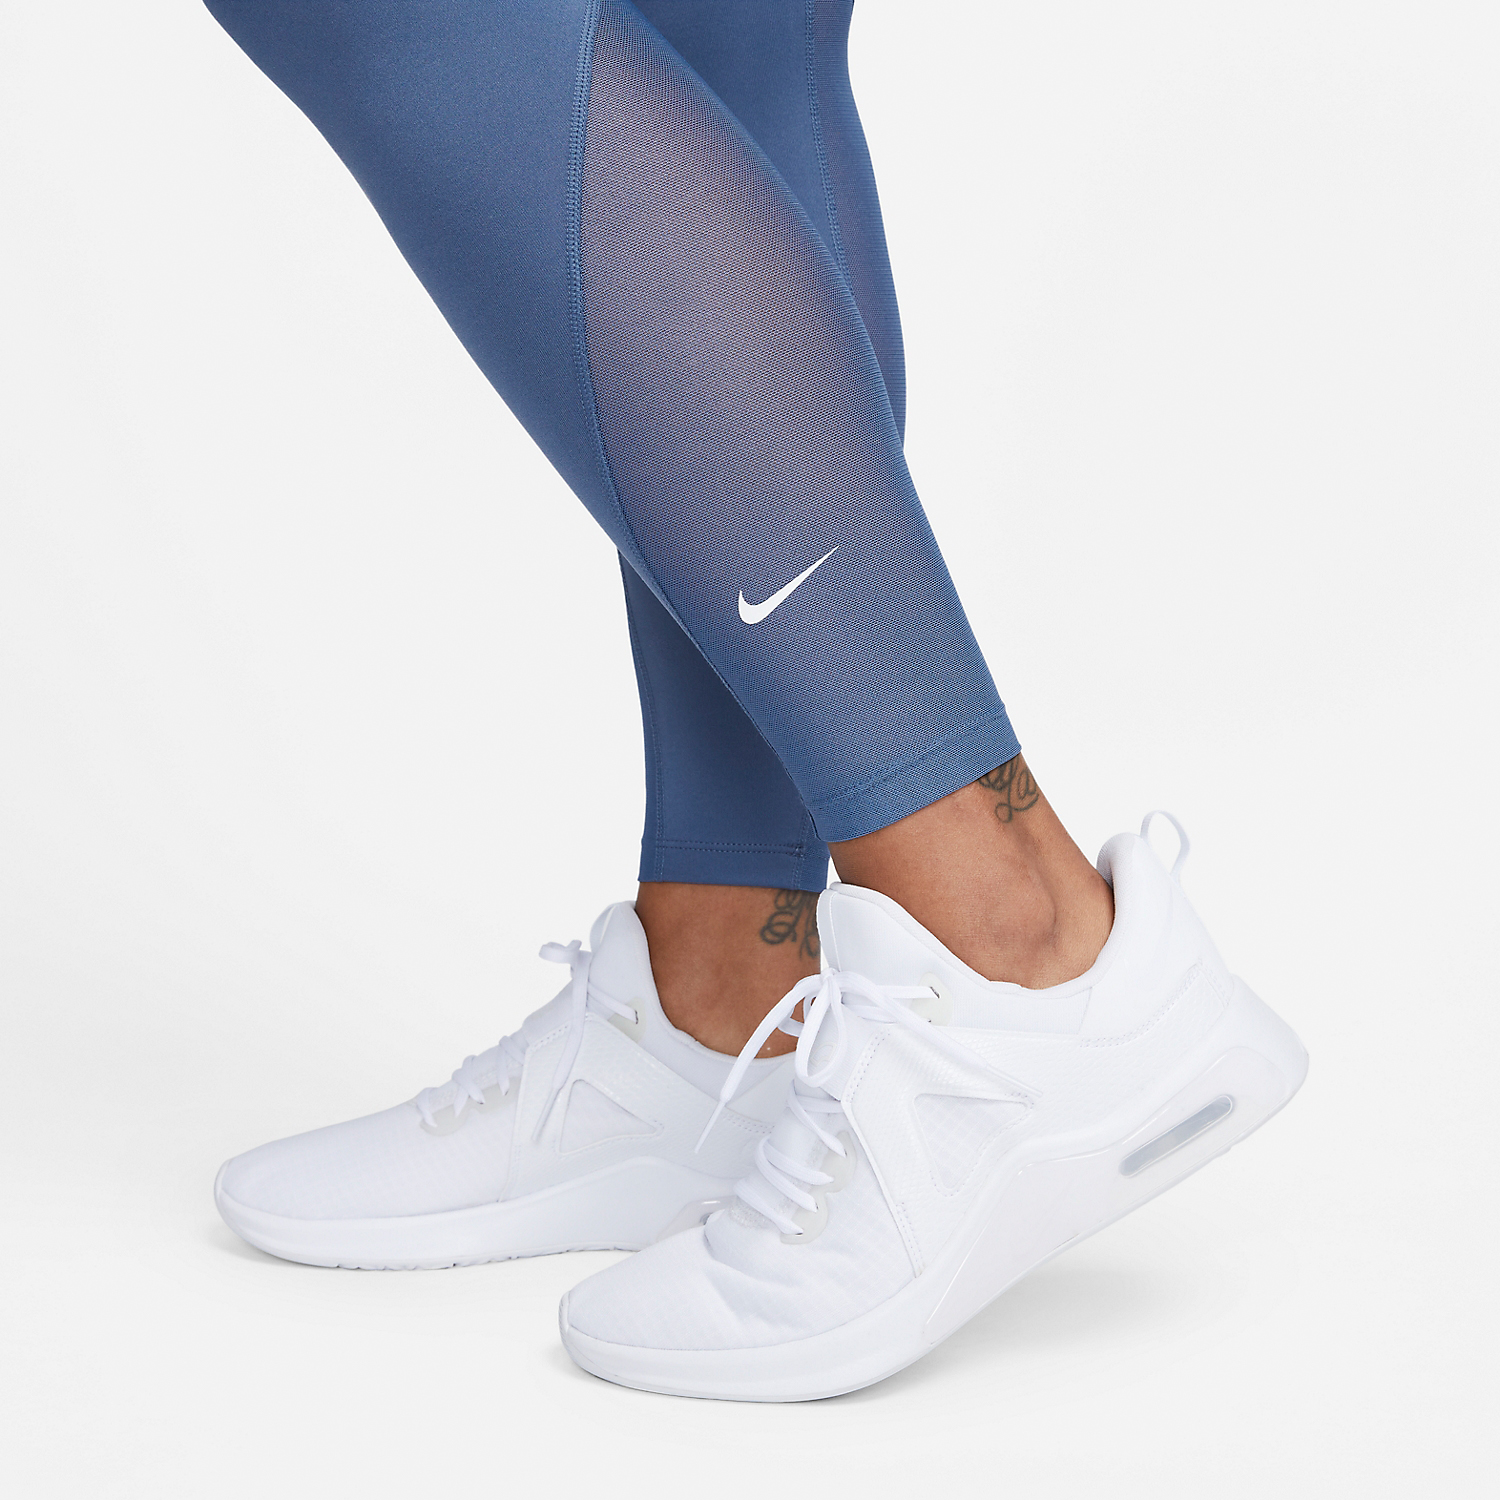 Nike One Mid Rise 7/8 Tights - Diffused Blue/White